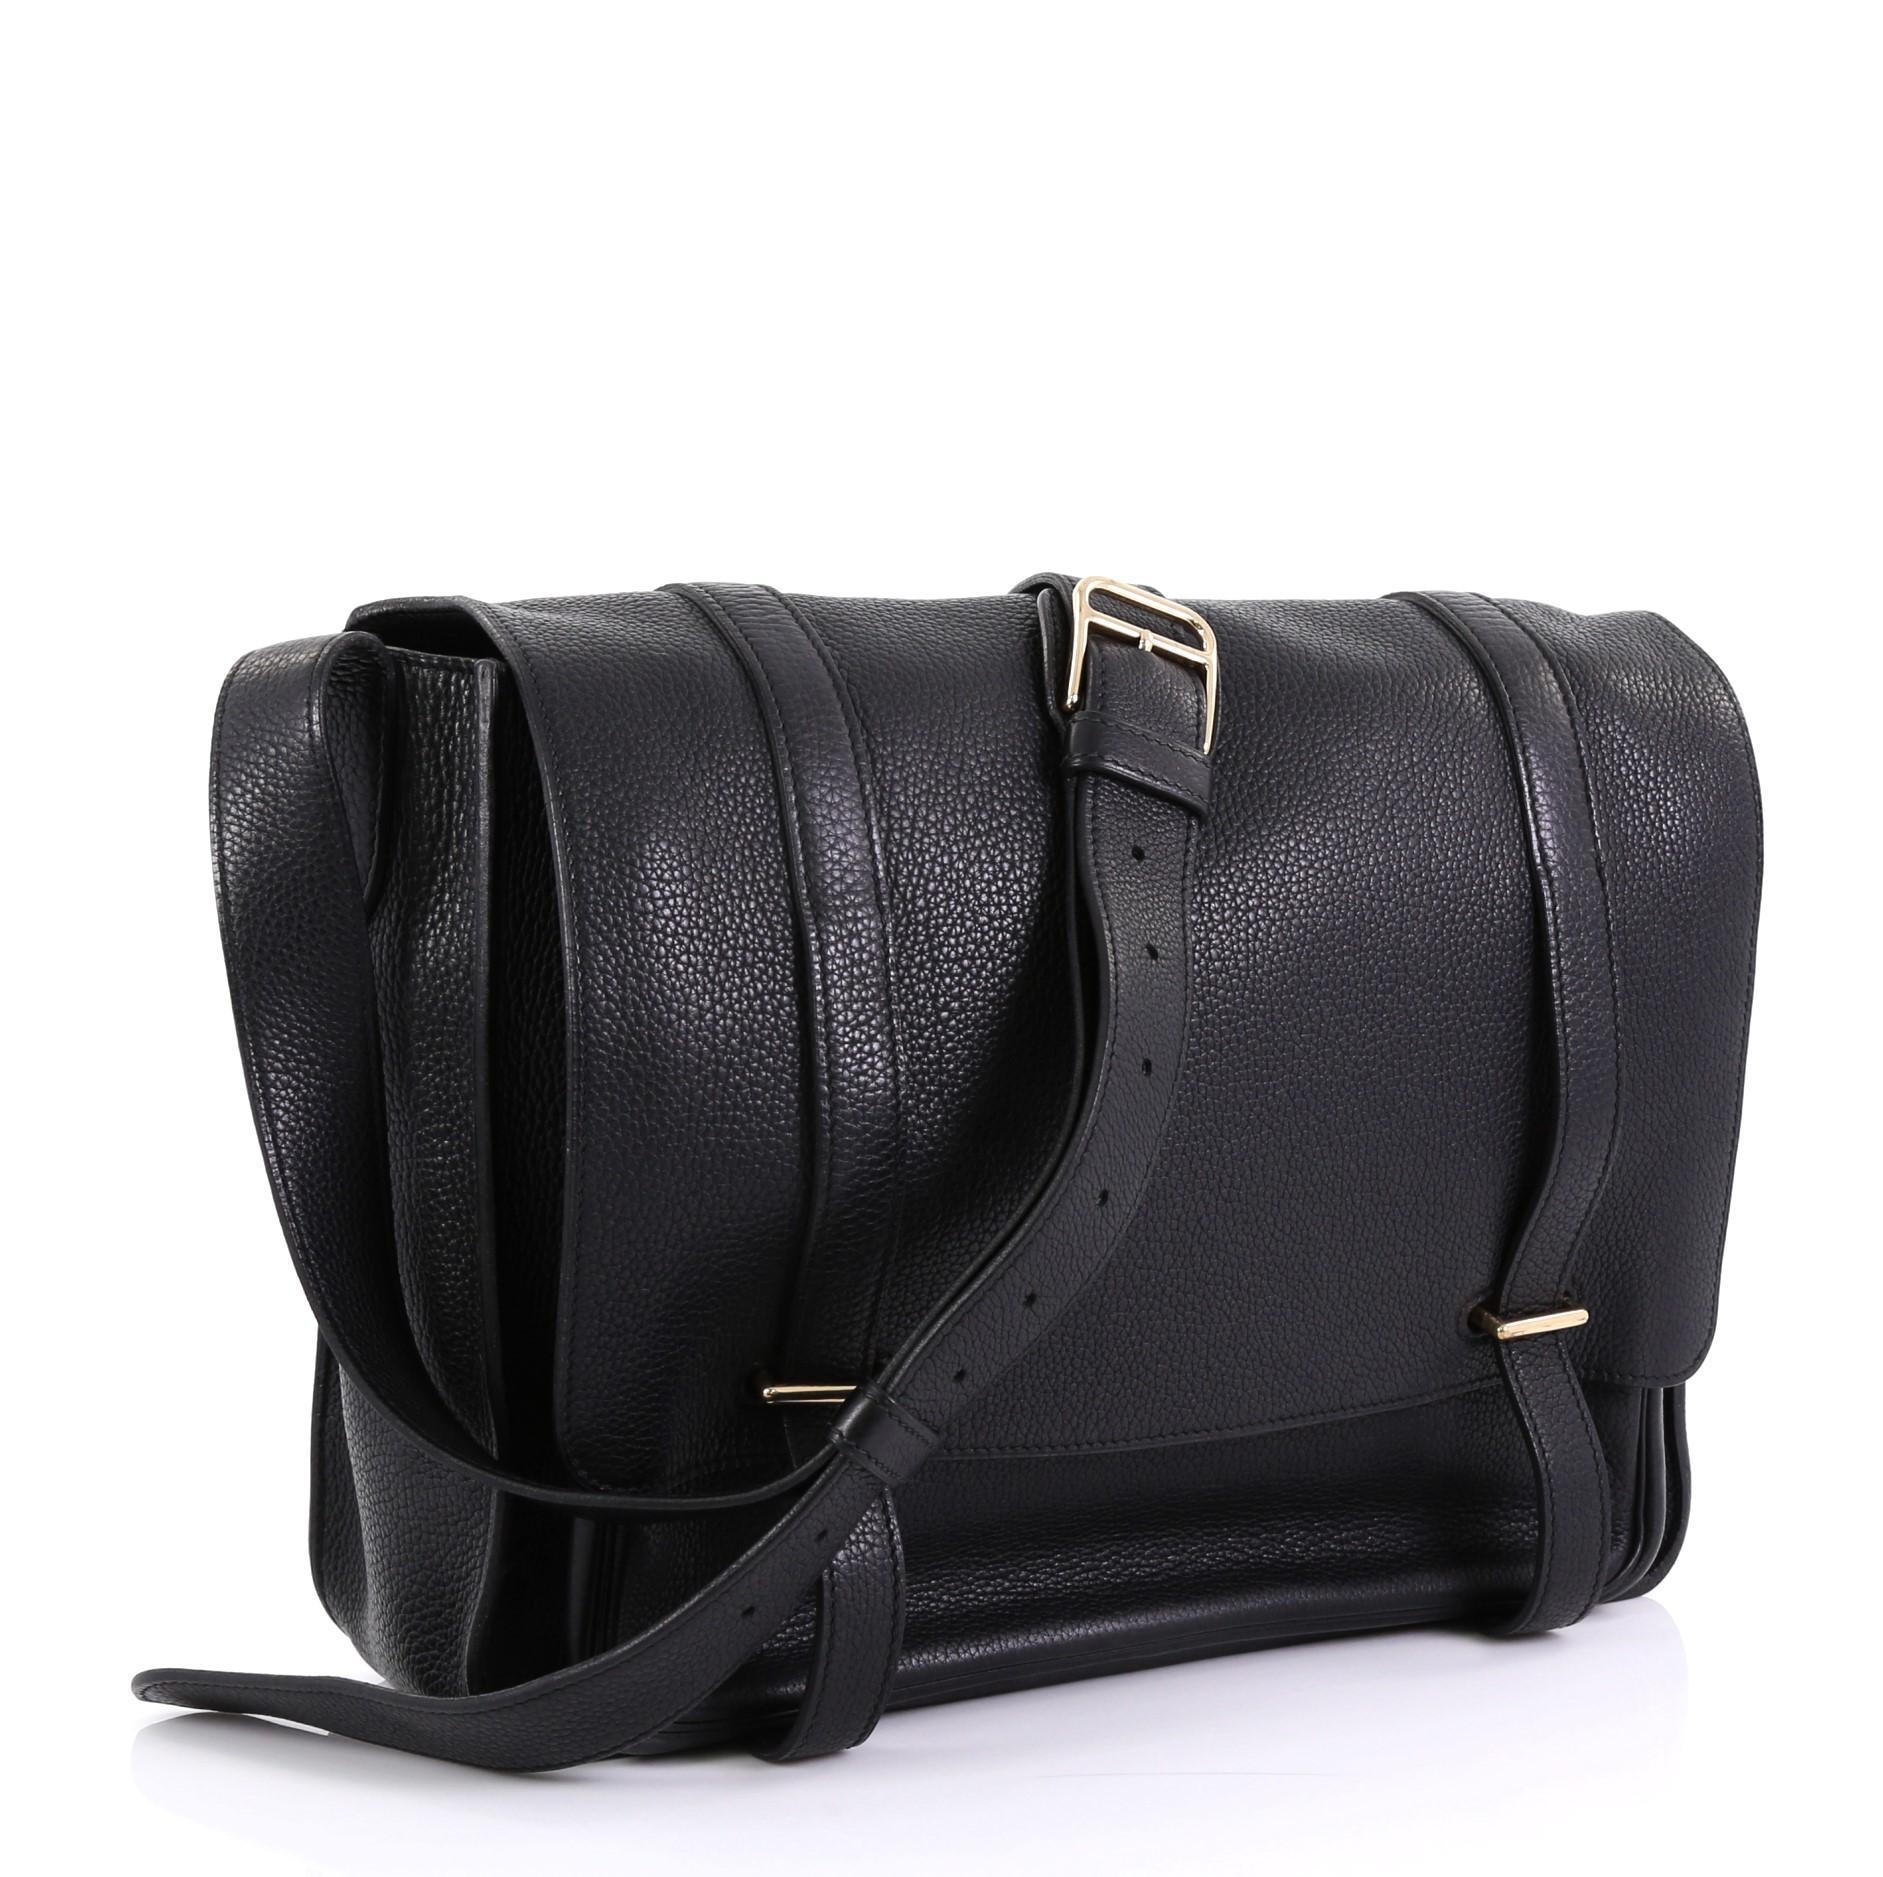 This Hermes Steve Messenger Bag Clemence 35, crafted in Noir black Clemence leather, features a frontal flap pocket with double tab and bracket closure, adjustable leather strap, and gold hardware. Its bracket closure opens to a Noir black Chevre